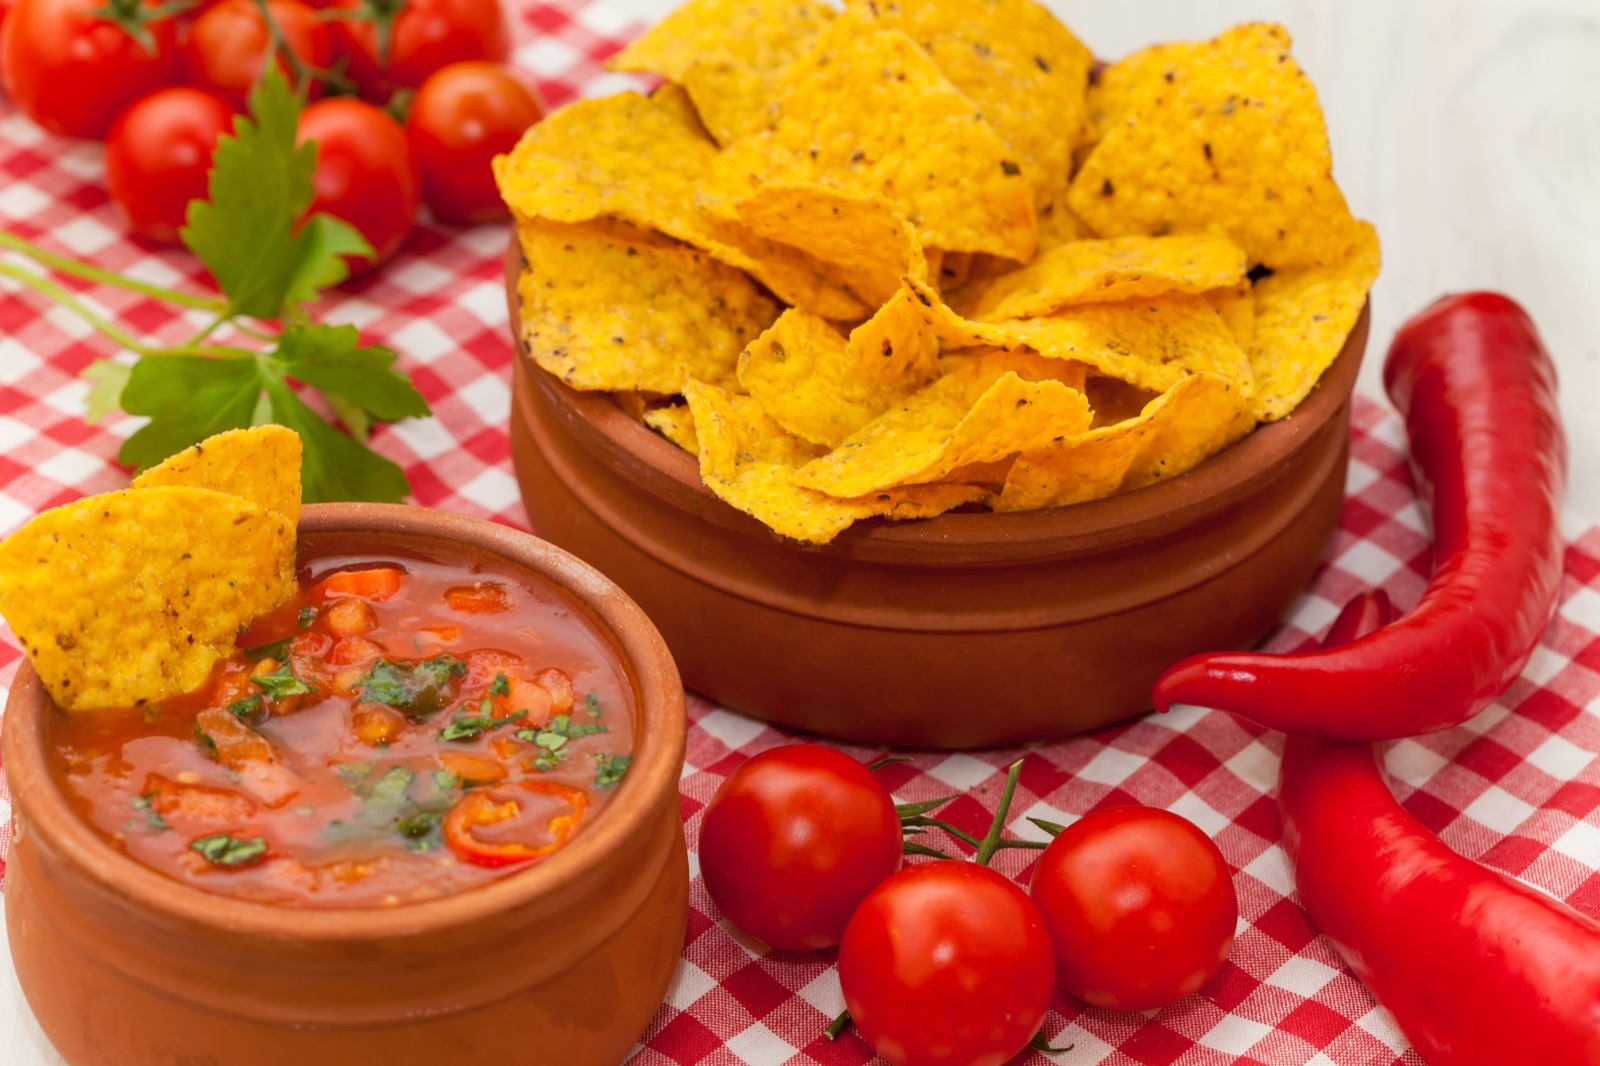 Say “Yum” Or “Yuck” to These Food Pairings to Find Out If You Are More Creative or Logical chips and salsa